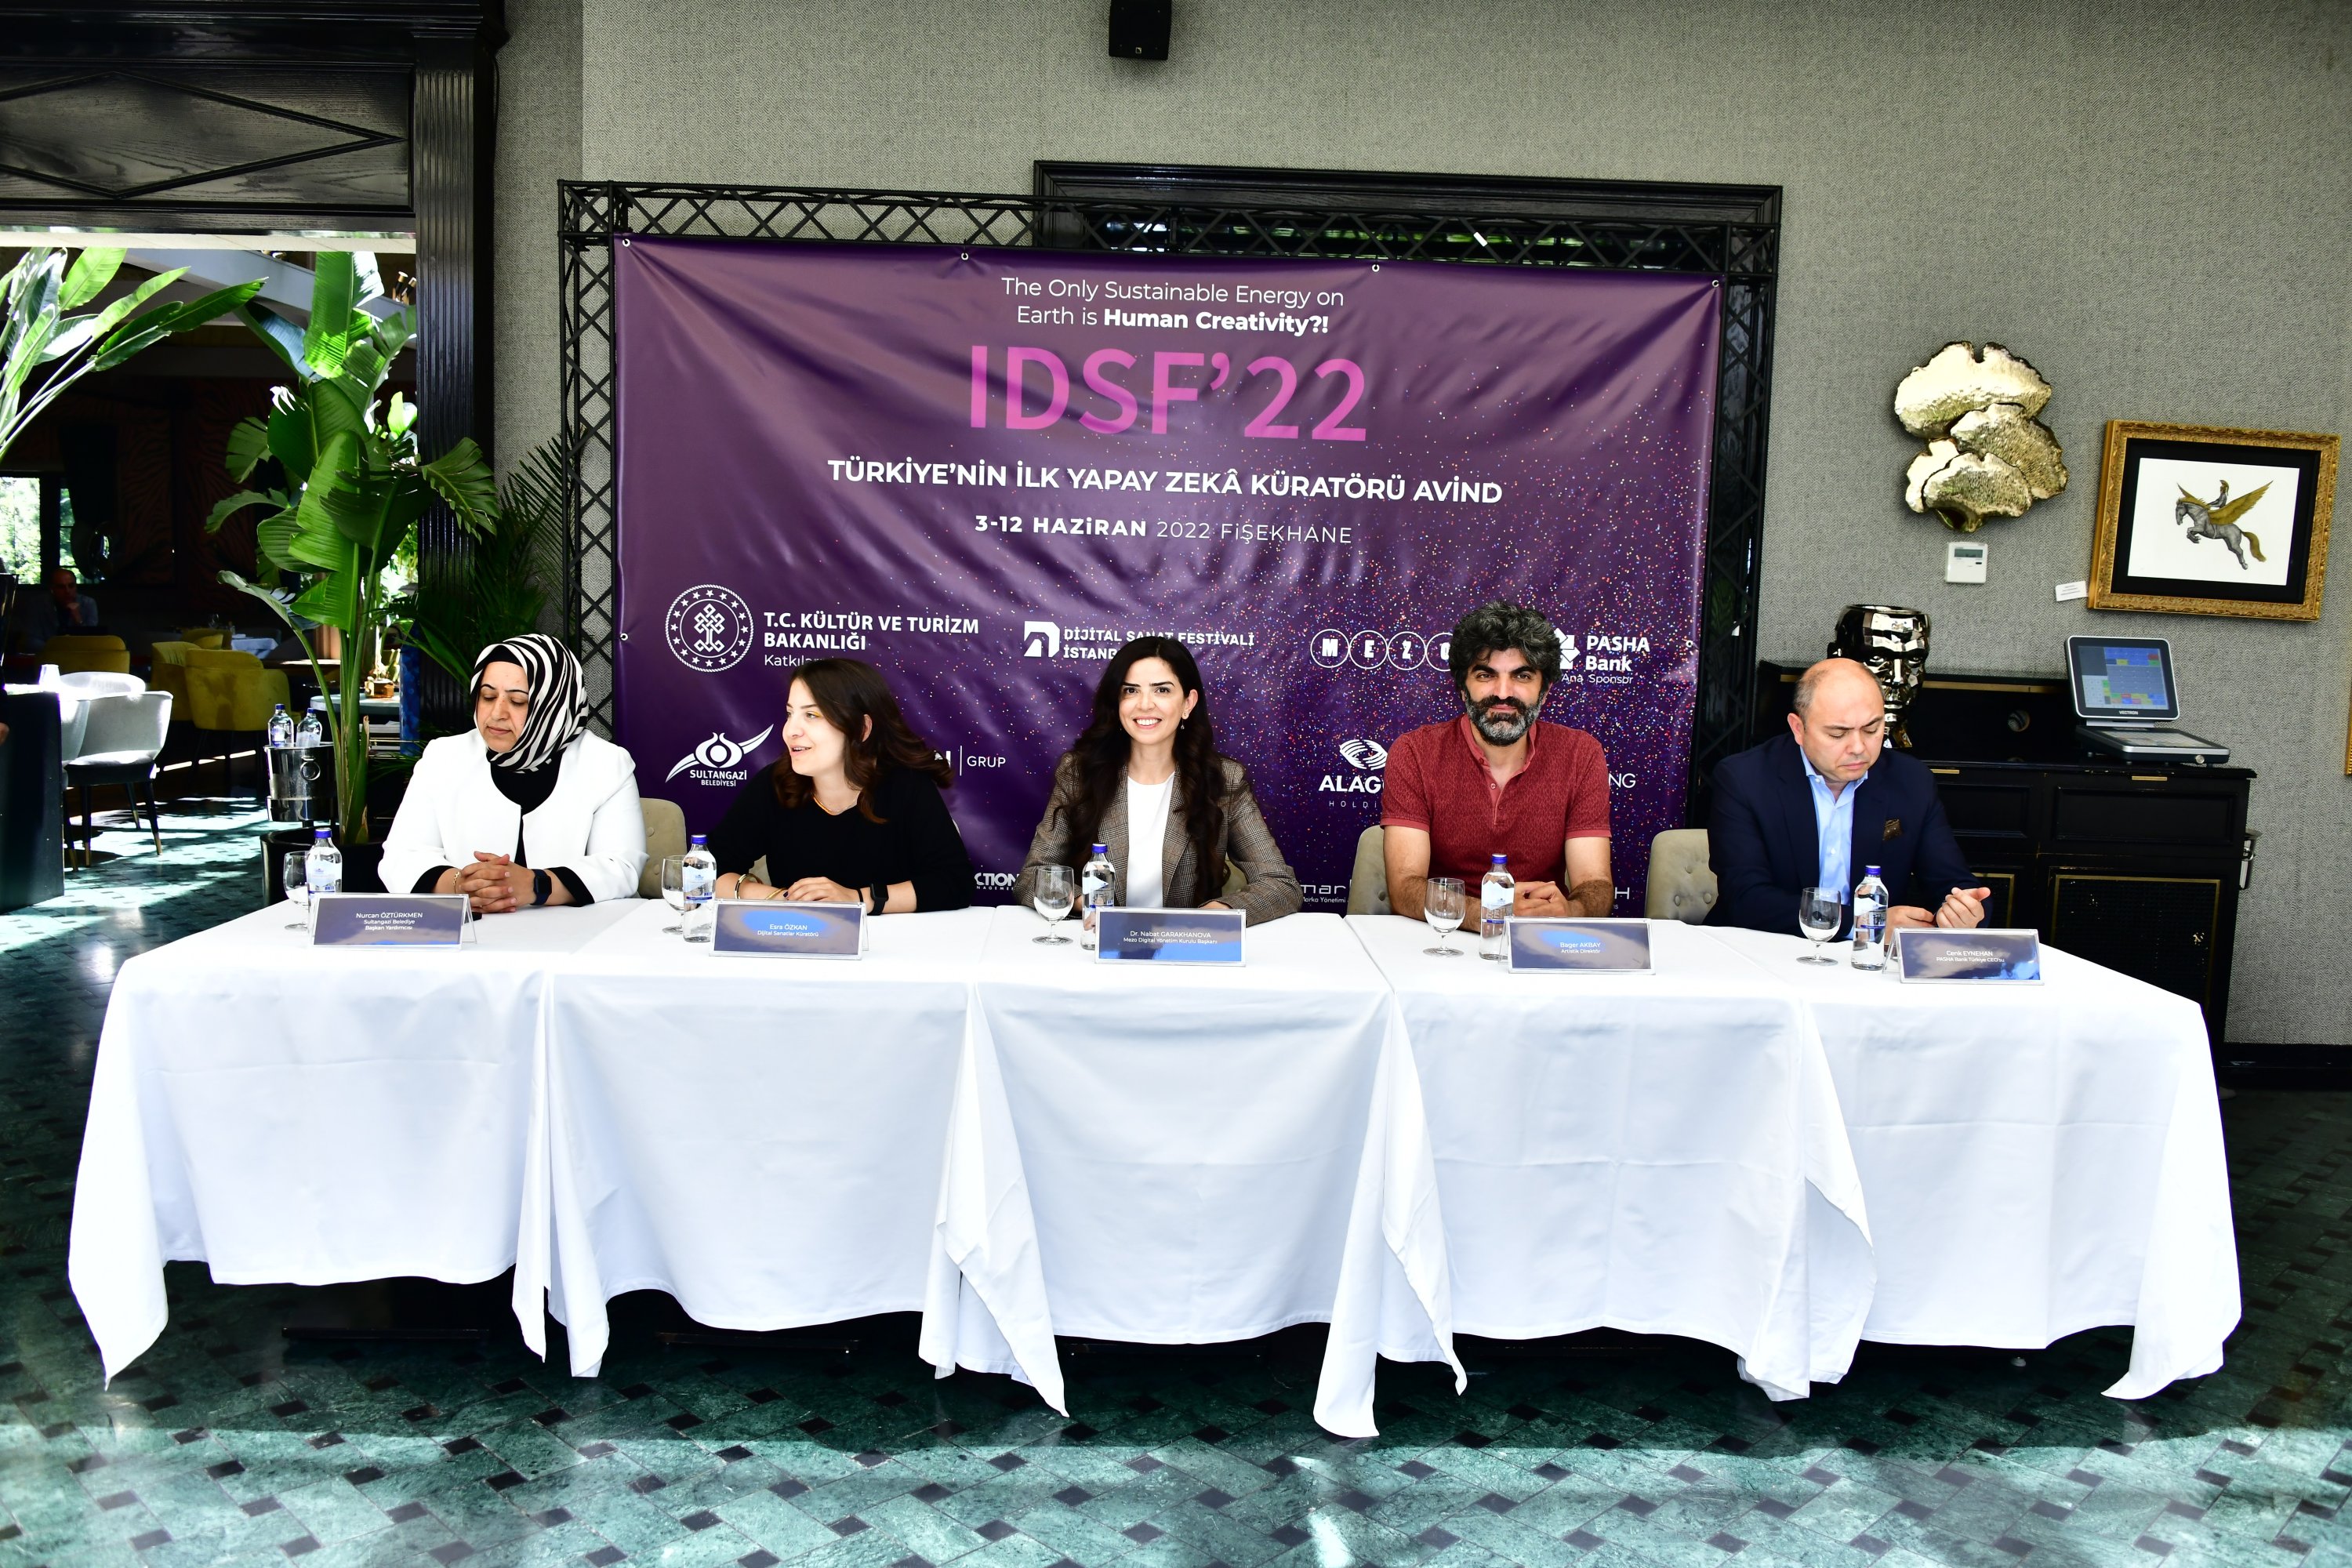 Speakers at the press conference of the 2nd Digital Art Festival, which will take place June 3-12, (L-R) Sultangazi Deputy Mayor Nurcan Öztürkmen, curator Esra Özkan, Mezo Digital Chairperson of the Board Nabat Garakhanova, curator Bager Akbay and PASHA Bank Chief Executive Officer H. Cenk Eynehan, Istanbul, Turkey, May 24, 2022. (Photo courtesy of the organization)